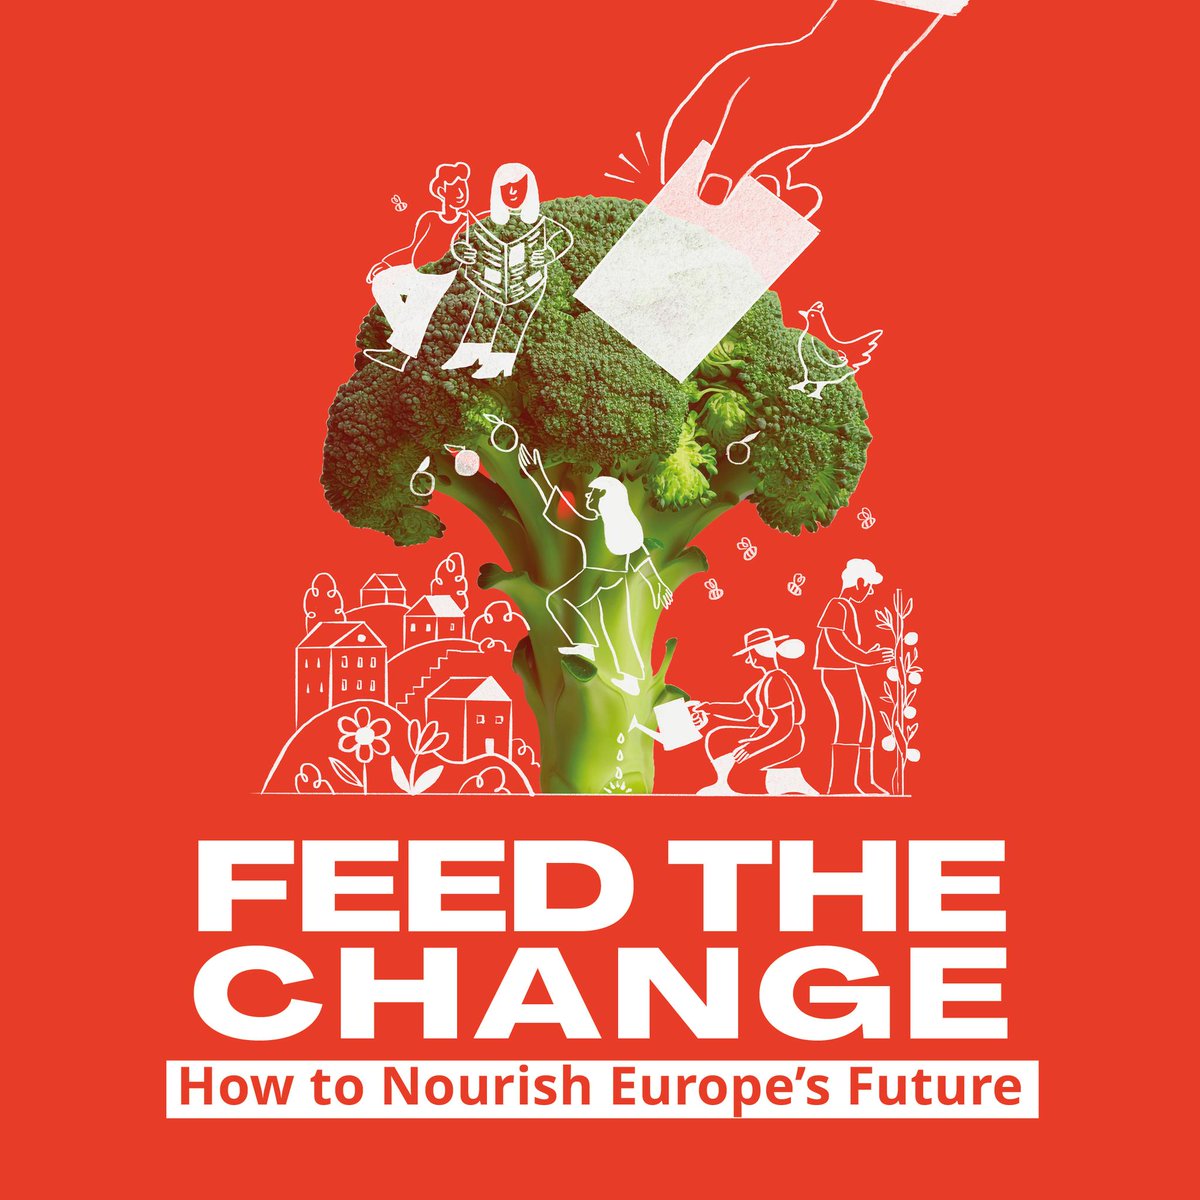 🗓️ Don't miss out! Join our #EUElections webinar on April 28 to learn more about: 🇪🇺 the key role of EU politics for food & agriculture ✊ the importance of citizen engagement 🤝 ways you can get involved Secure your spot 👉 bit.ly/3WkYlc1 @TheGoodLobby #FeedTheChange